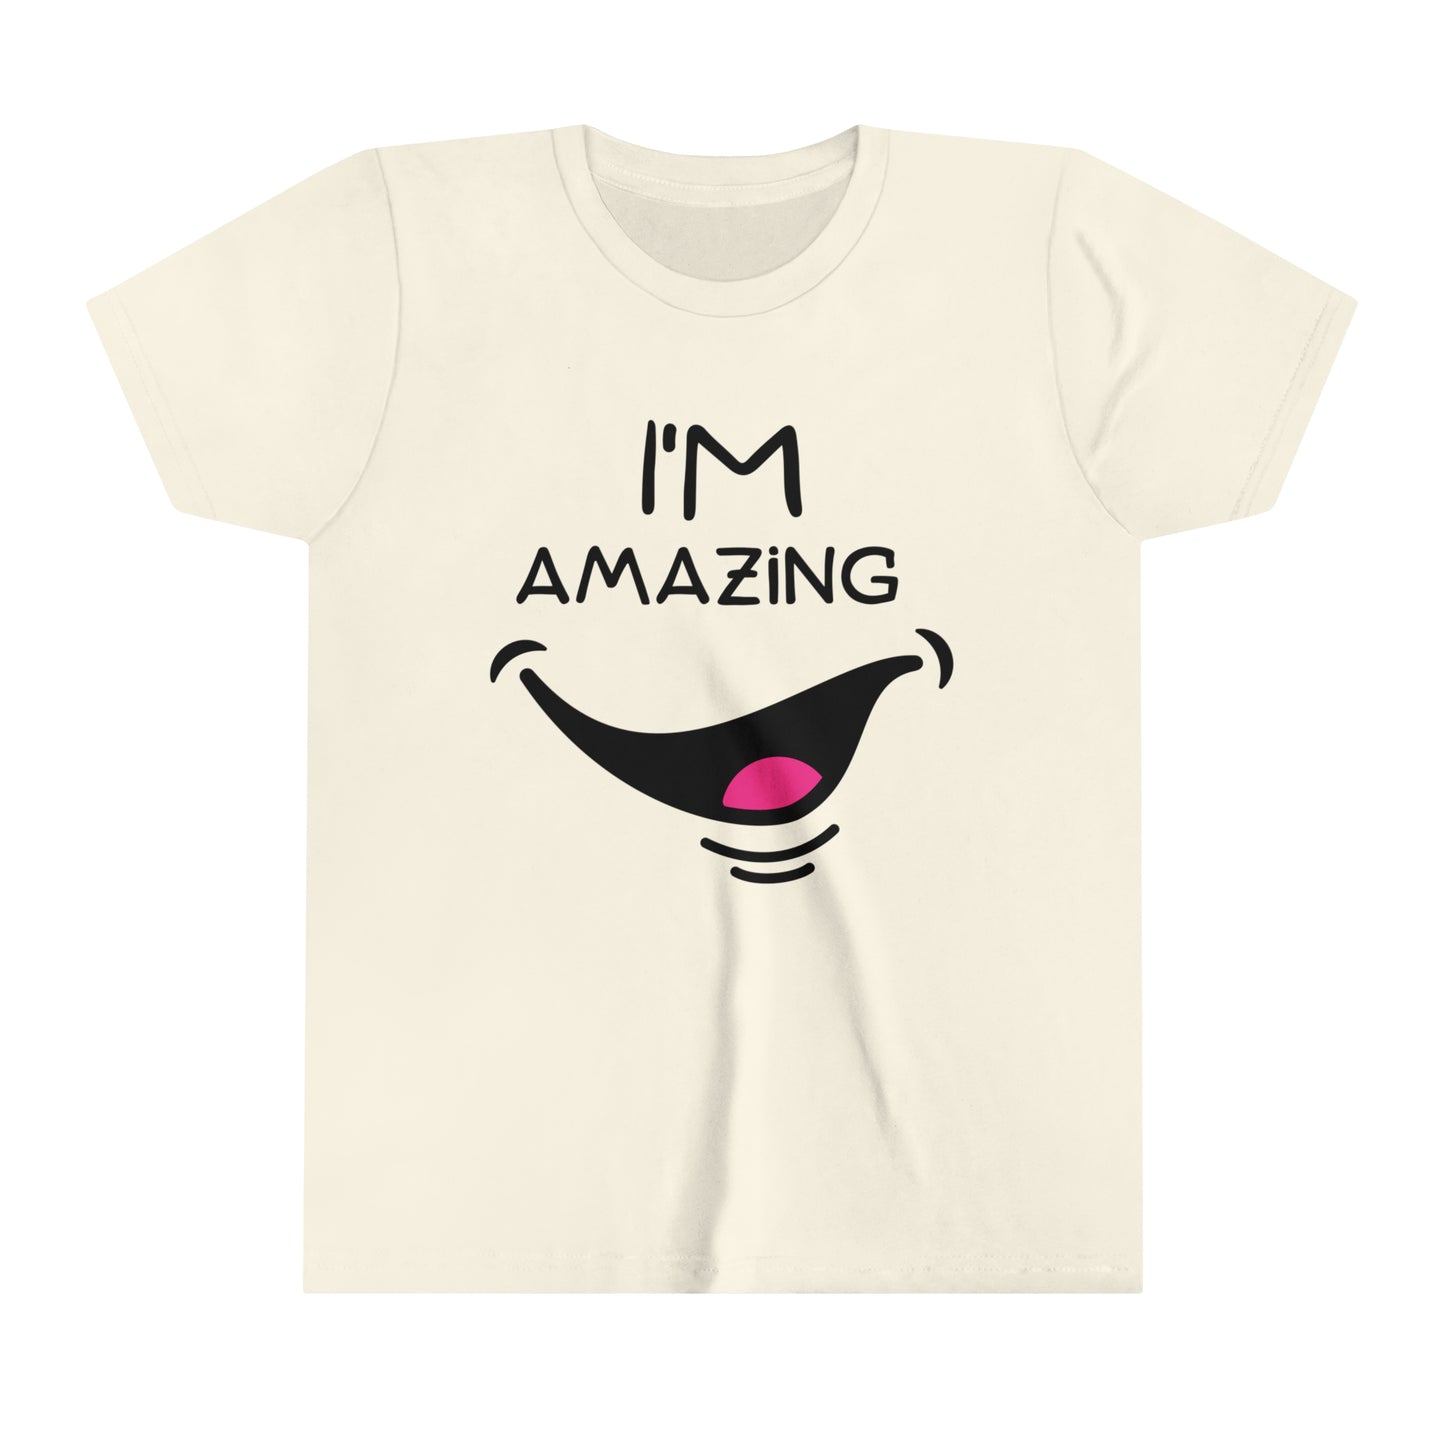 I'm Amazing With Cheeky Smile Youth Short Sleeve Tee